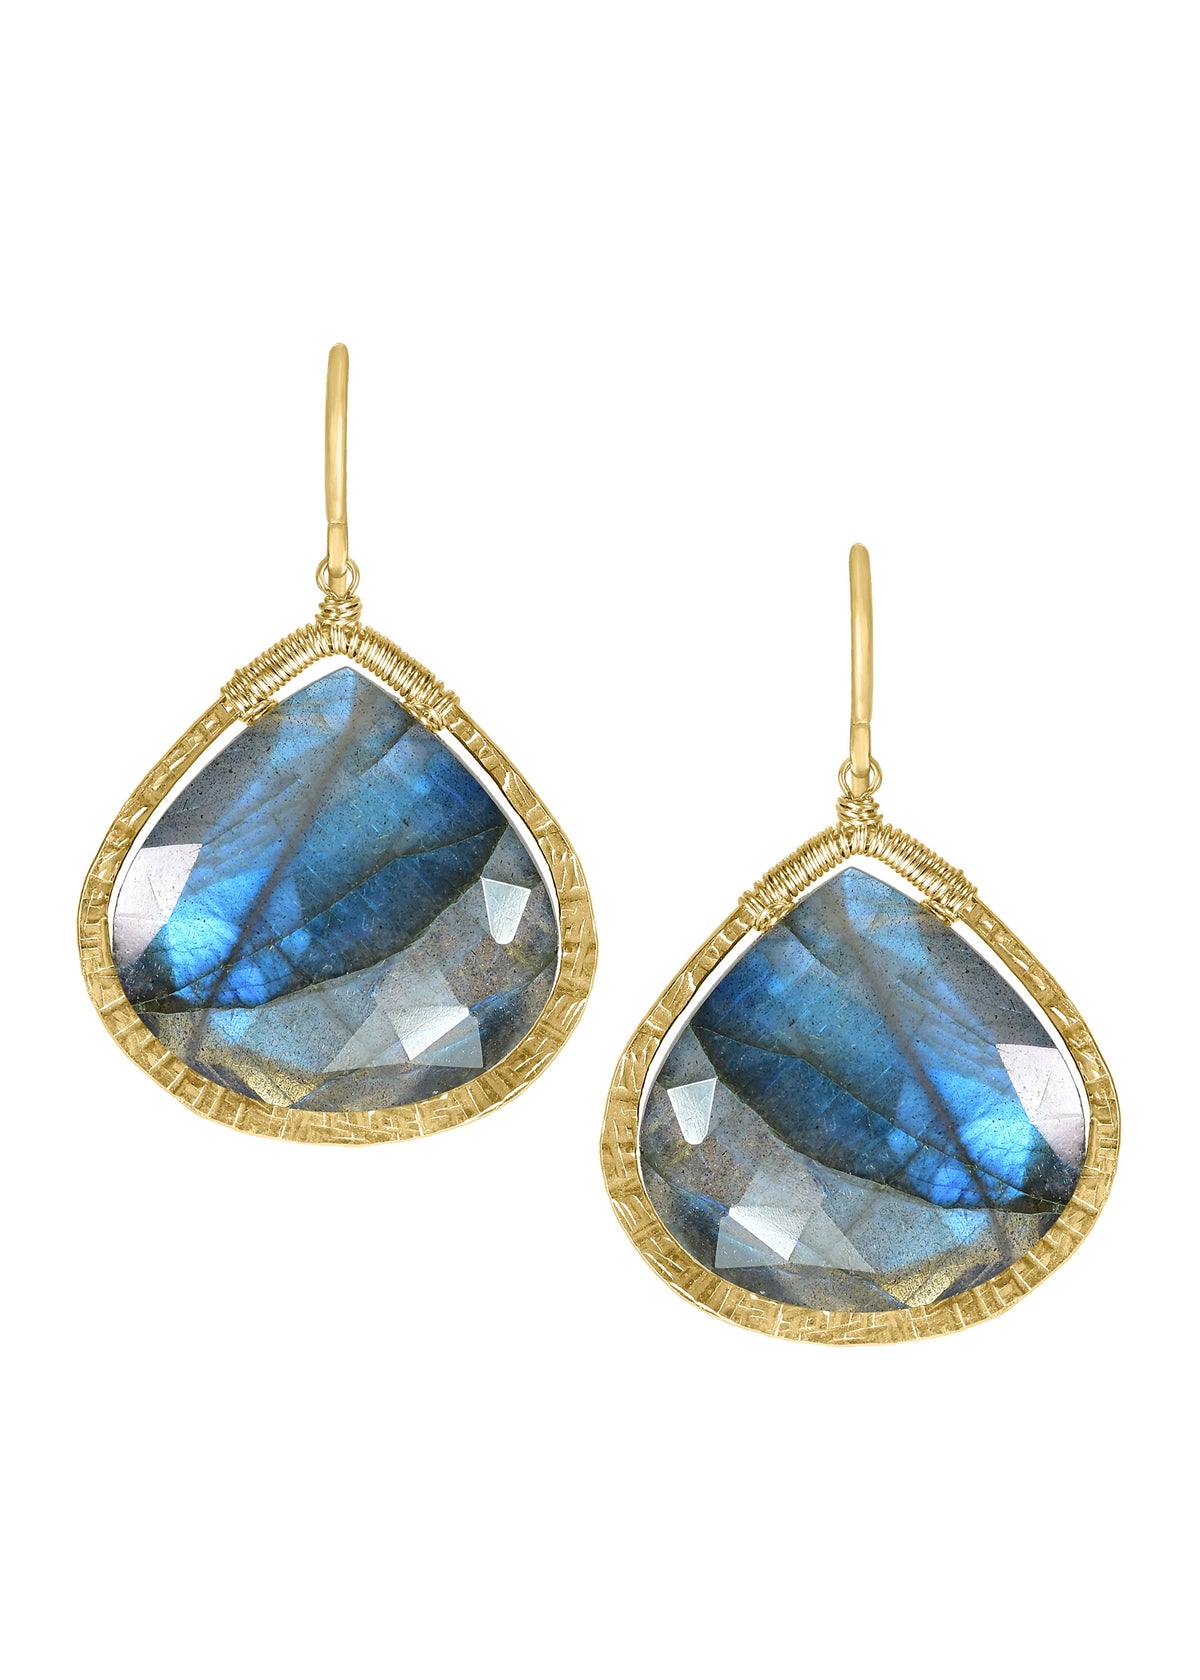 Labradorite 14k gold fill Earrings measure 1-3/8&quot; in length (including the ear wires) and 7/8&quot; in width at the widest point Handmade in our Los Angeles studio